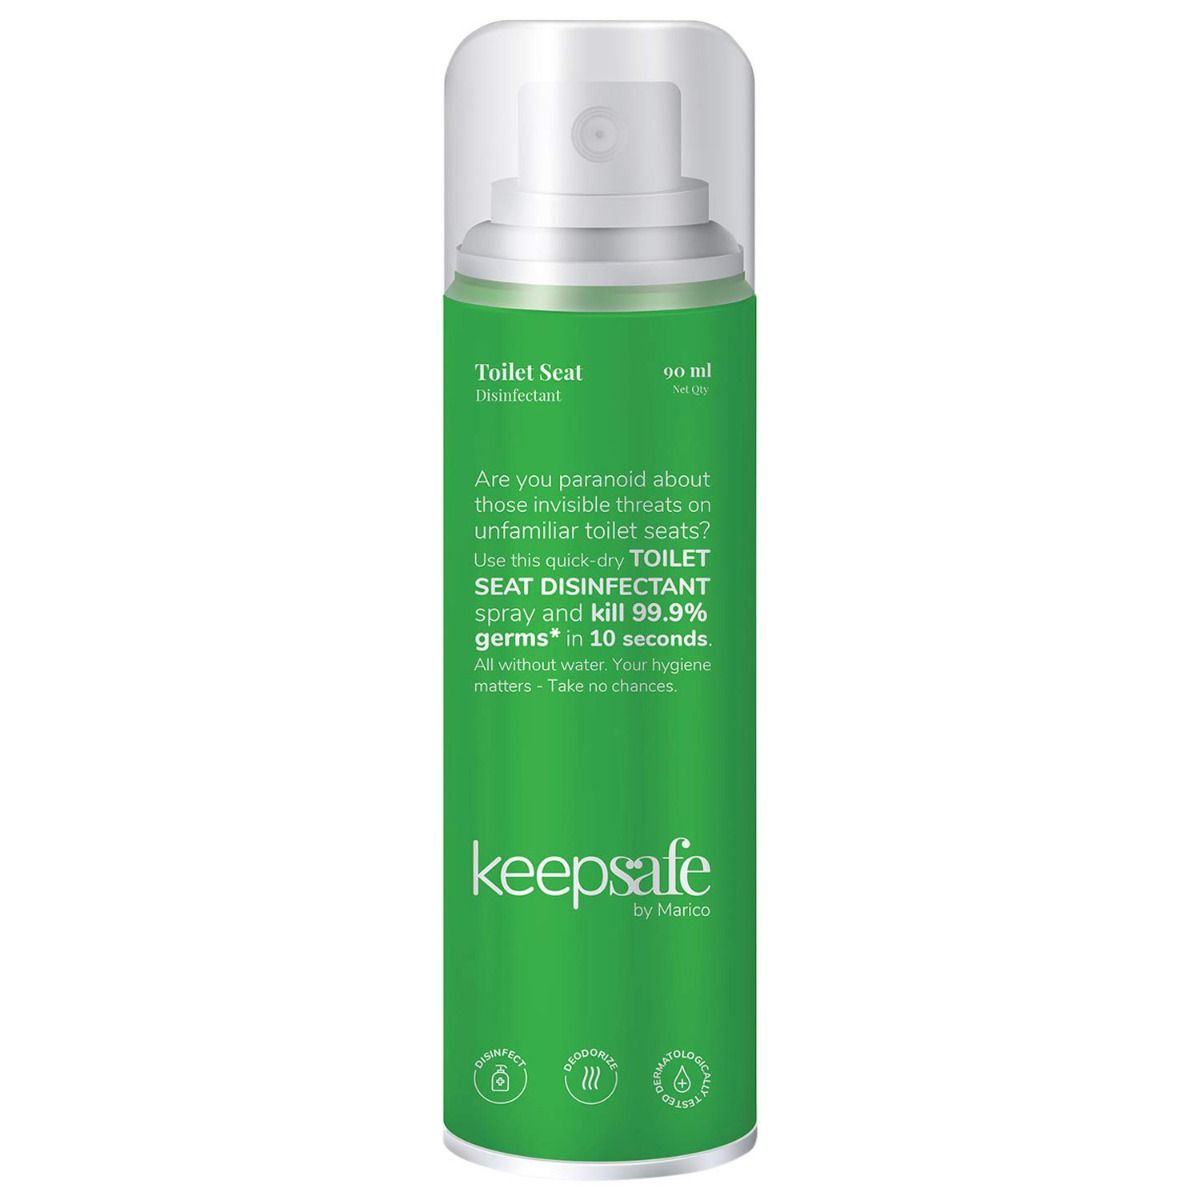 KeepSafe Toilet Seat Disinfectant Spray, 90 ml, Pack of 1 